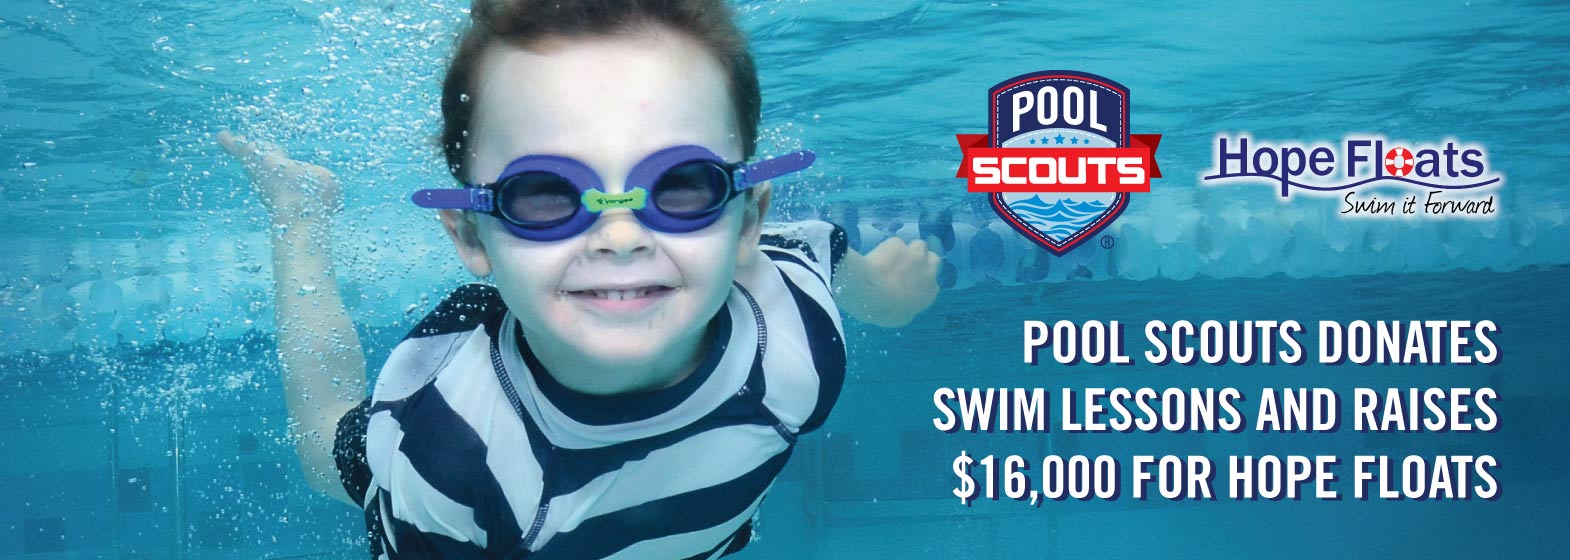 Image of Pool Scouts Donates Swim Lessons and Raises $16,000 for Hope Floats